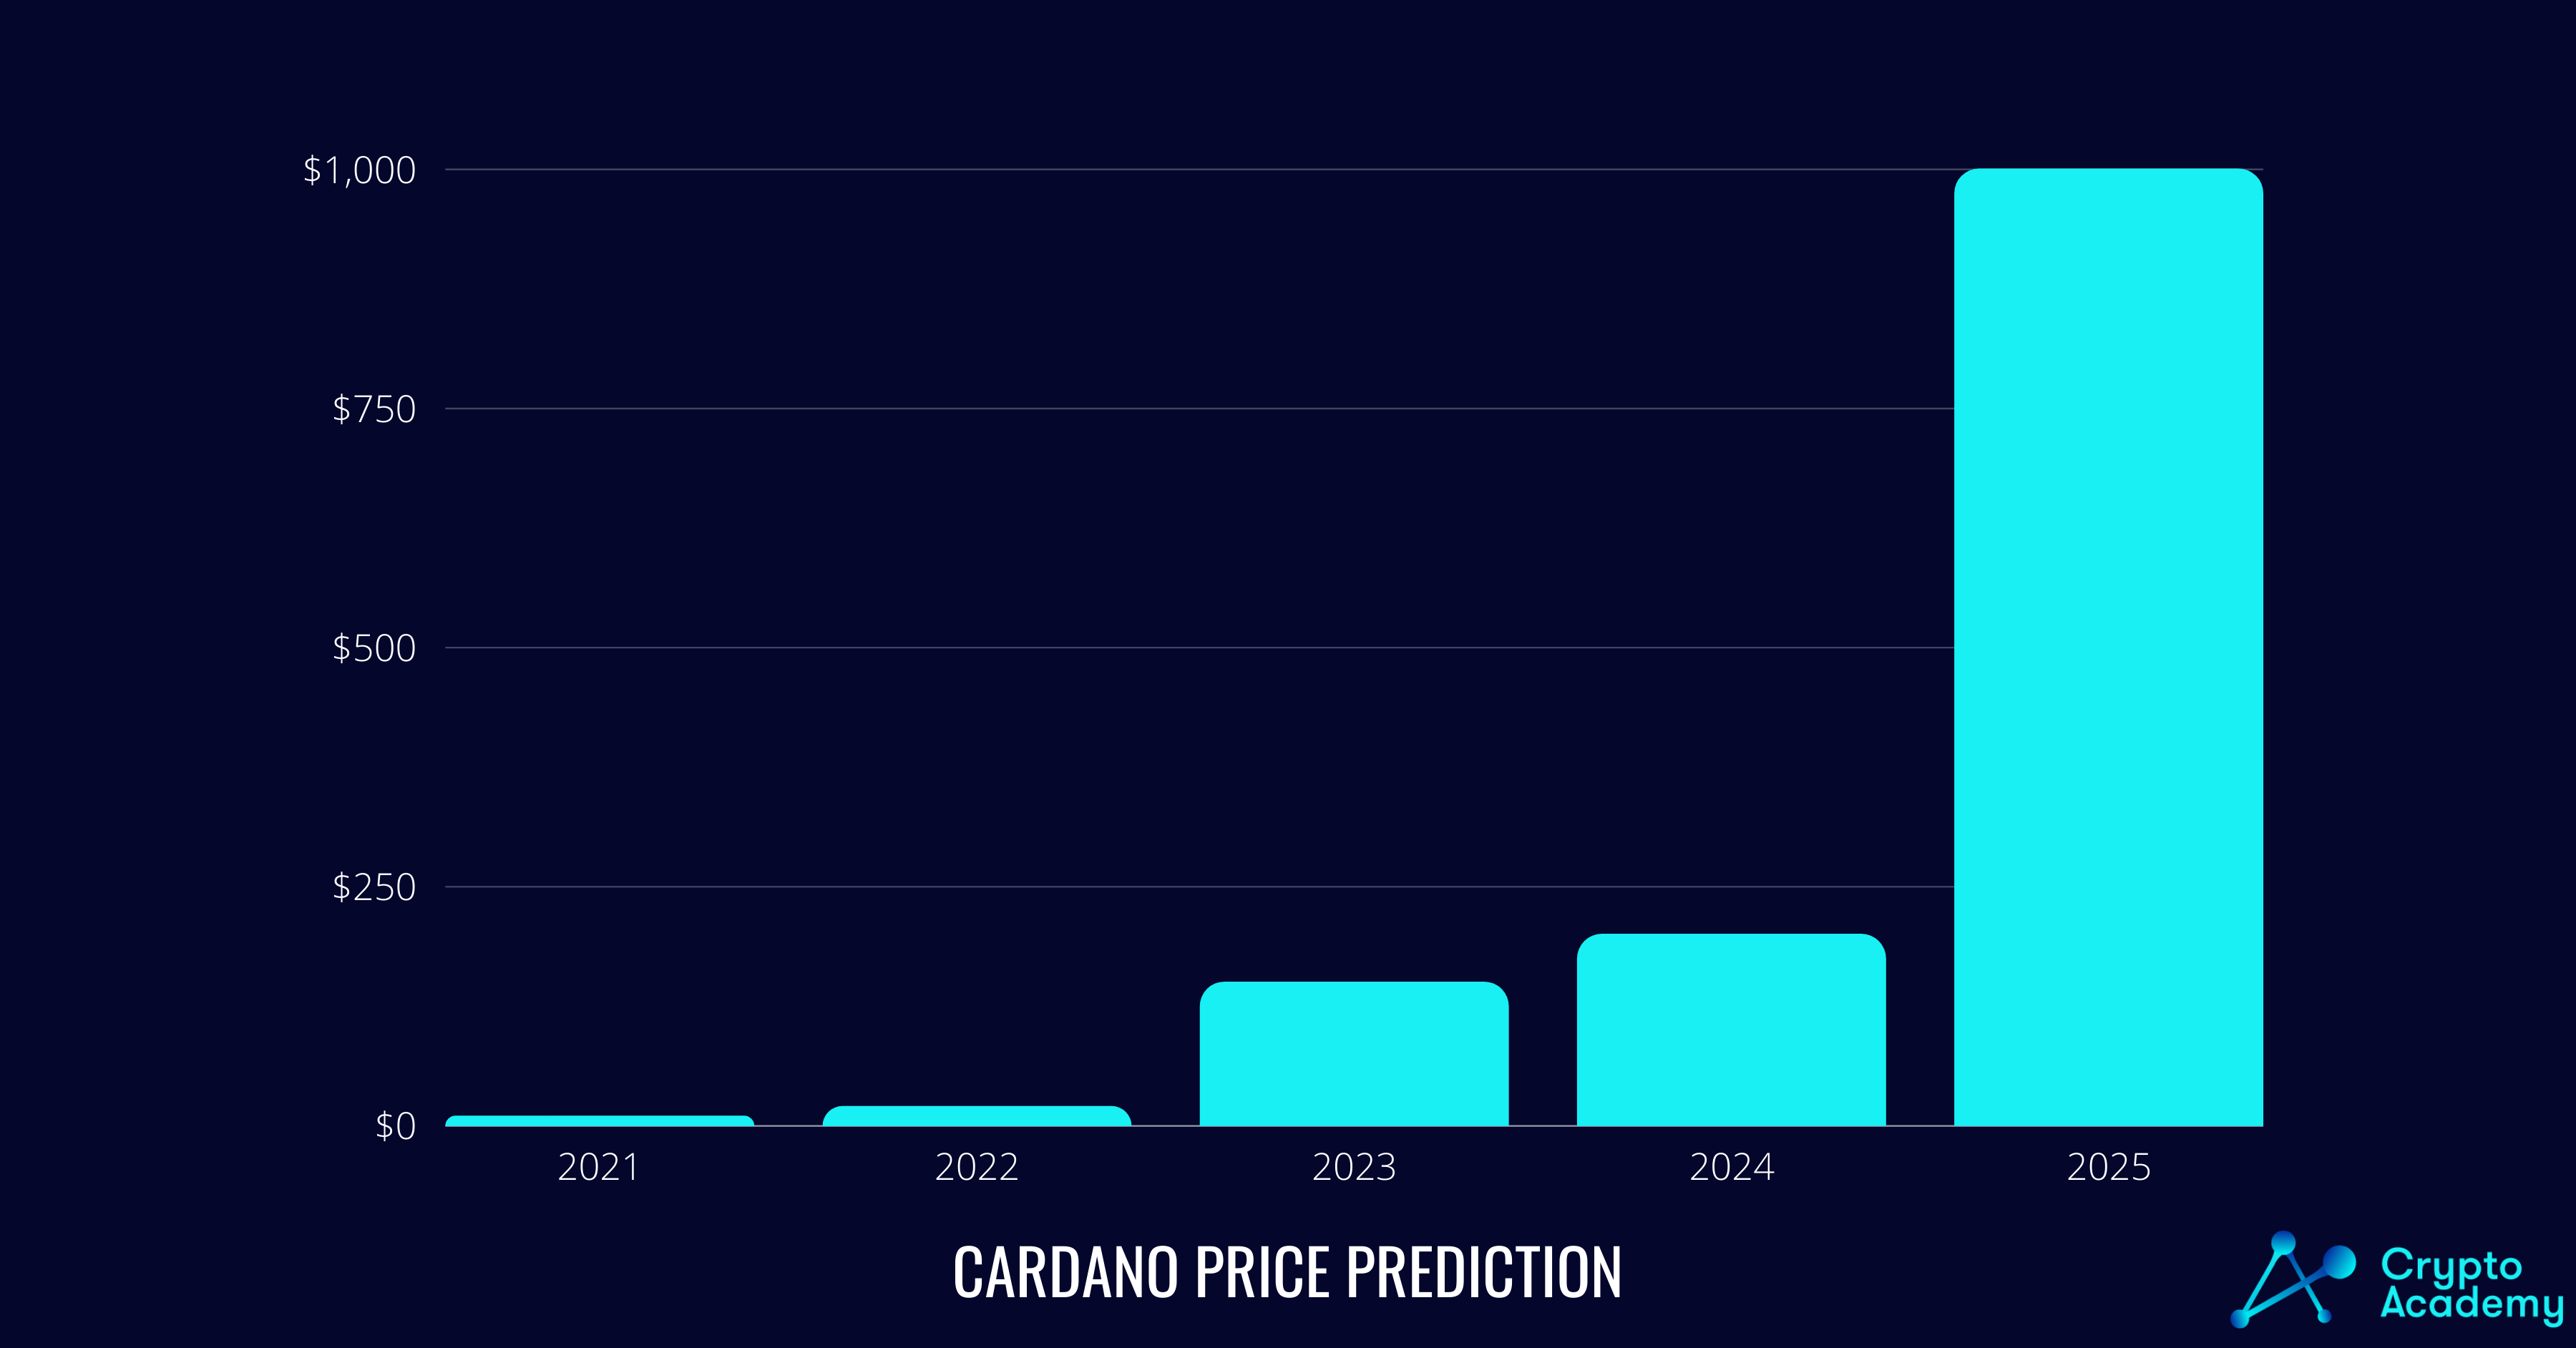 Cardano Price Prediction - What Does The Future Hold For Cardano